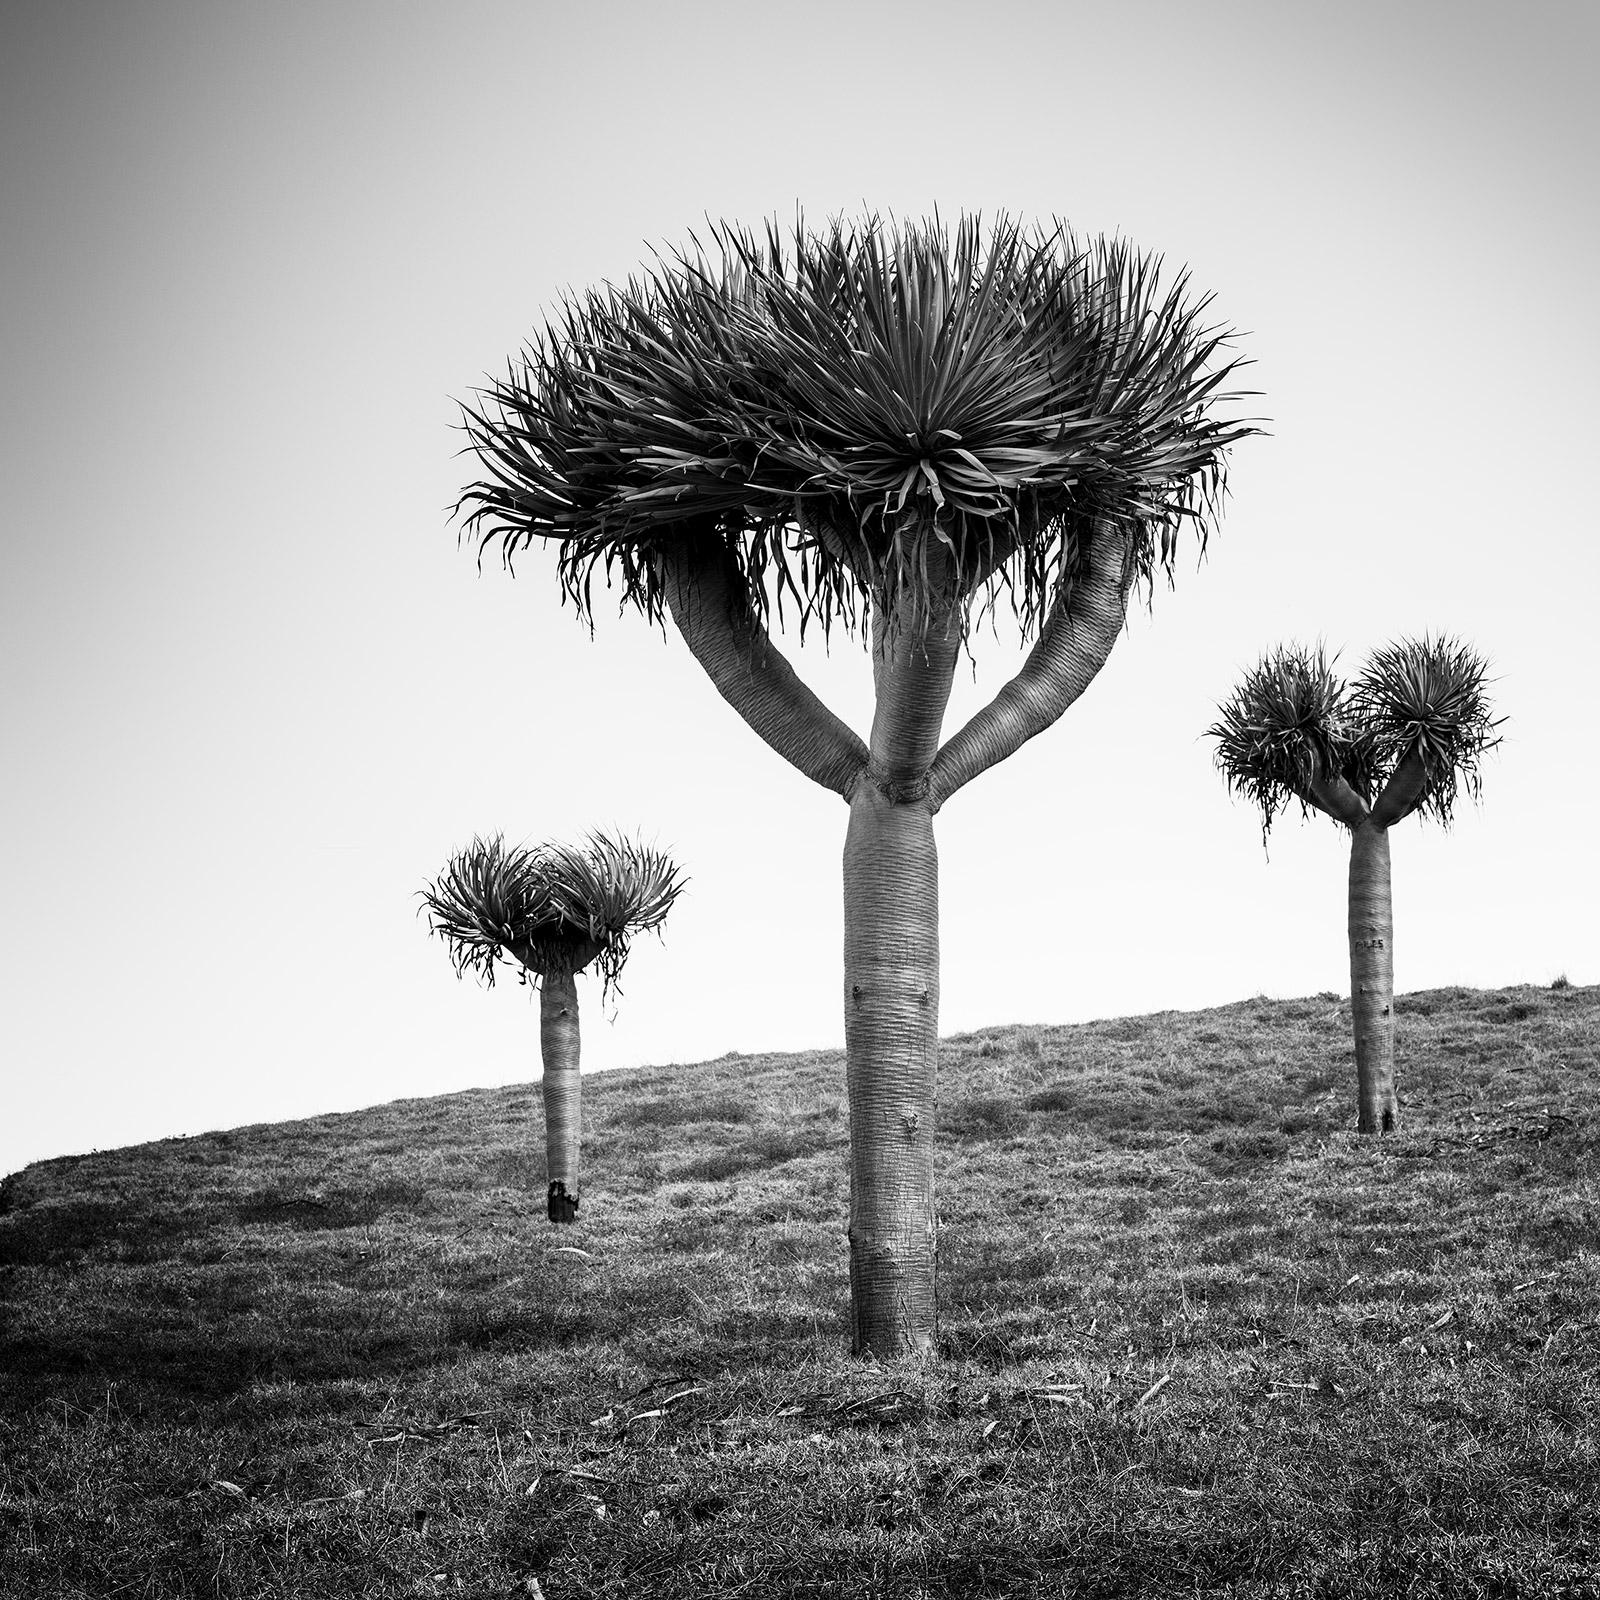 Black and White Fine Art landscape photography. Dragen trees on the beautiful island of Madeira, Portugal. Archival pigment ink print, edition of 8. Signed, titled, dated and numbered by artist. Certificate of authenticity included. Printed with 4cm